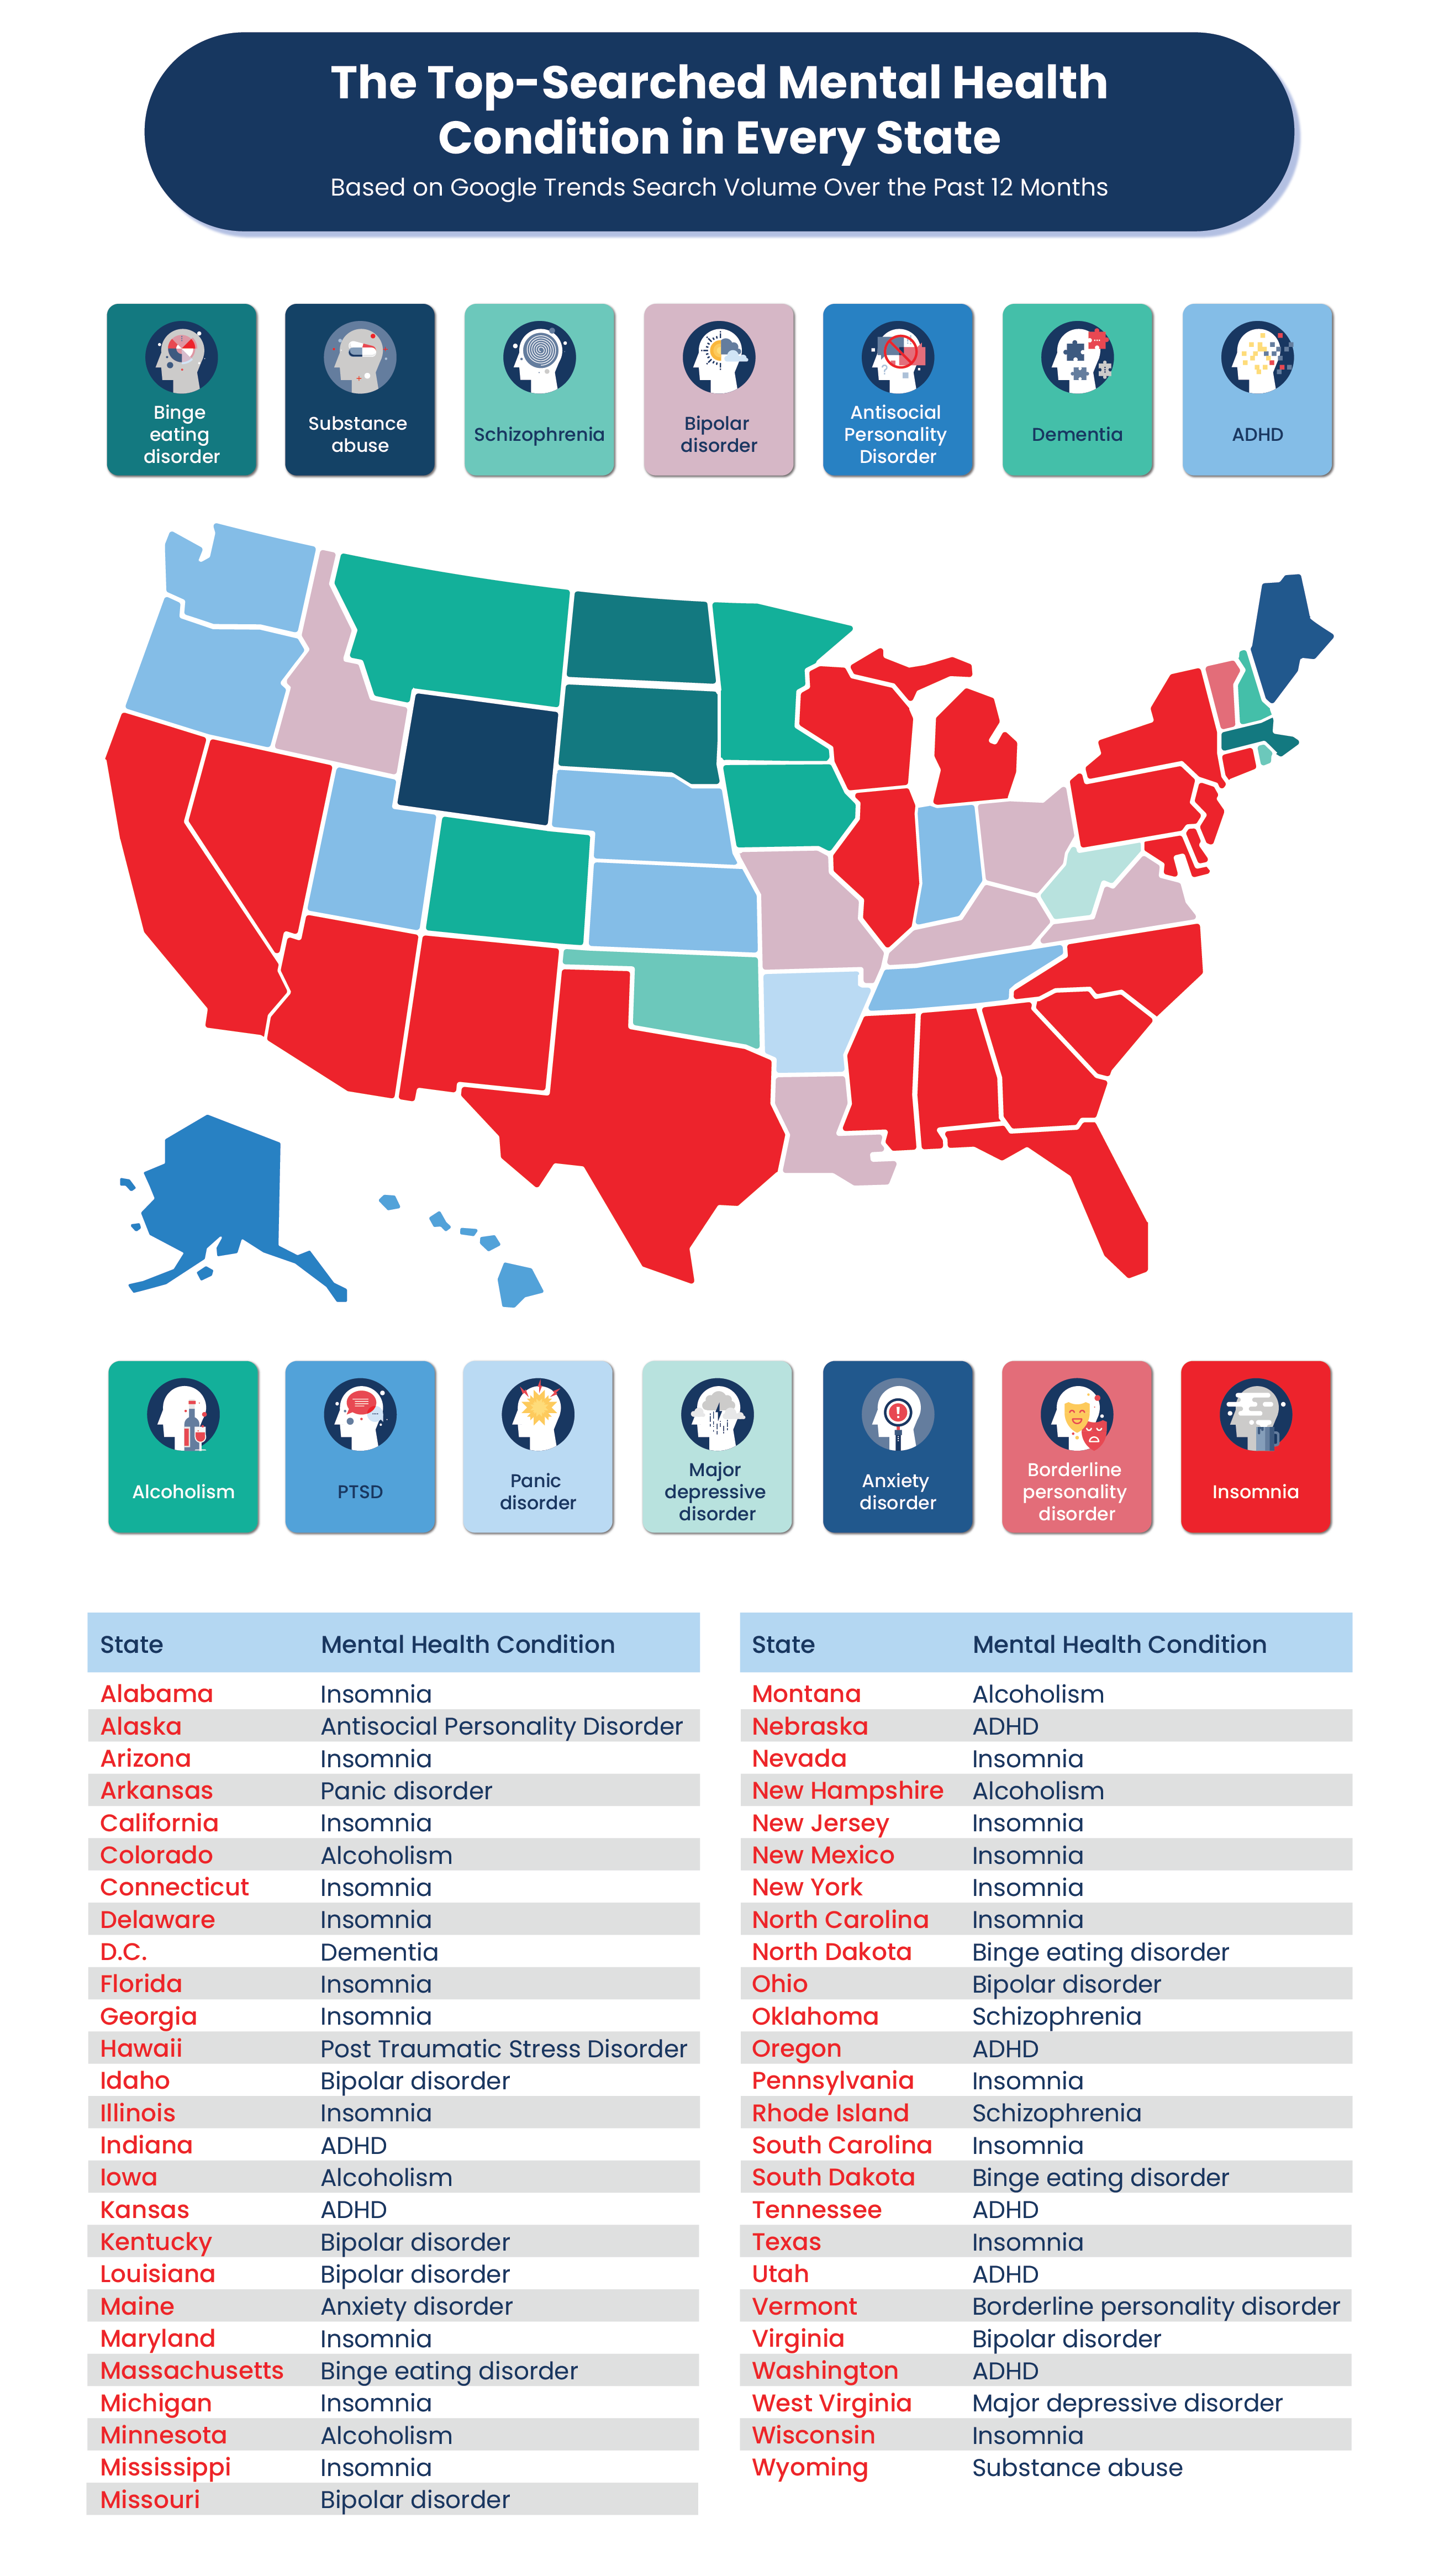 a US map plotting the top-searched mental health condition in each state